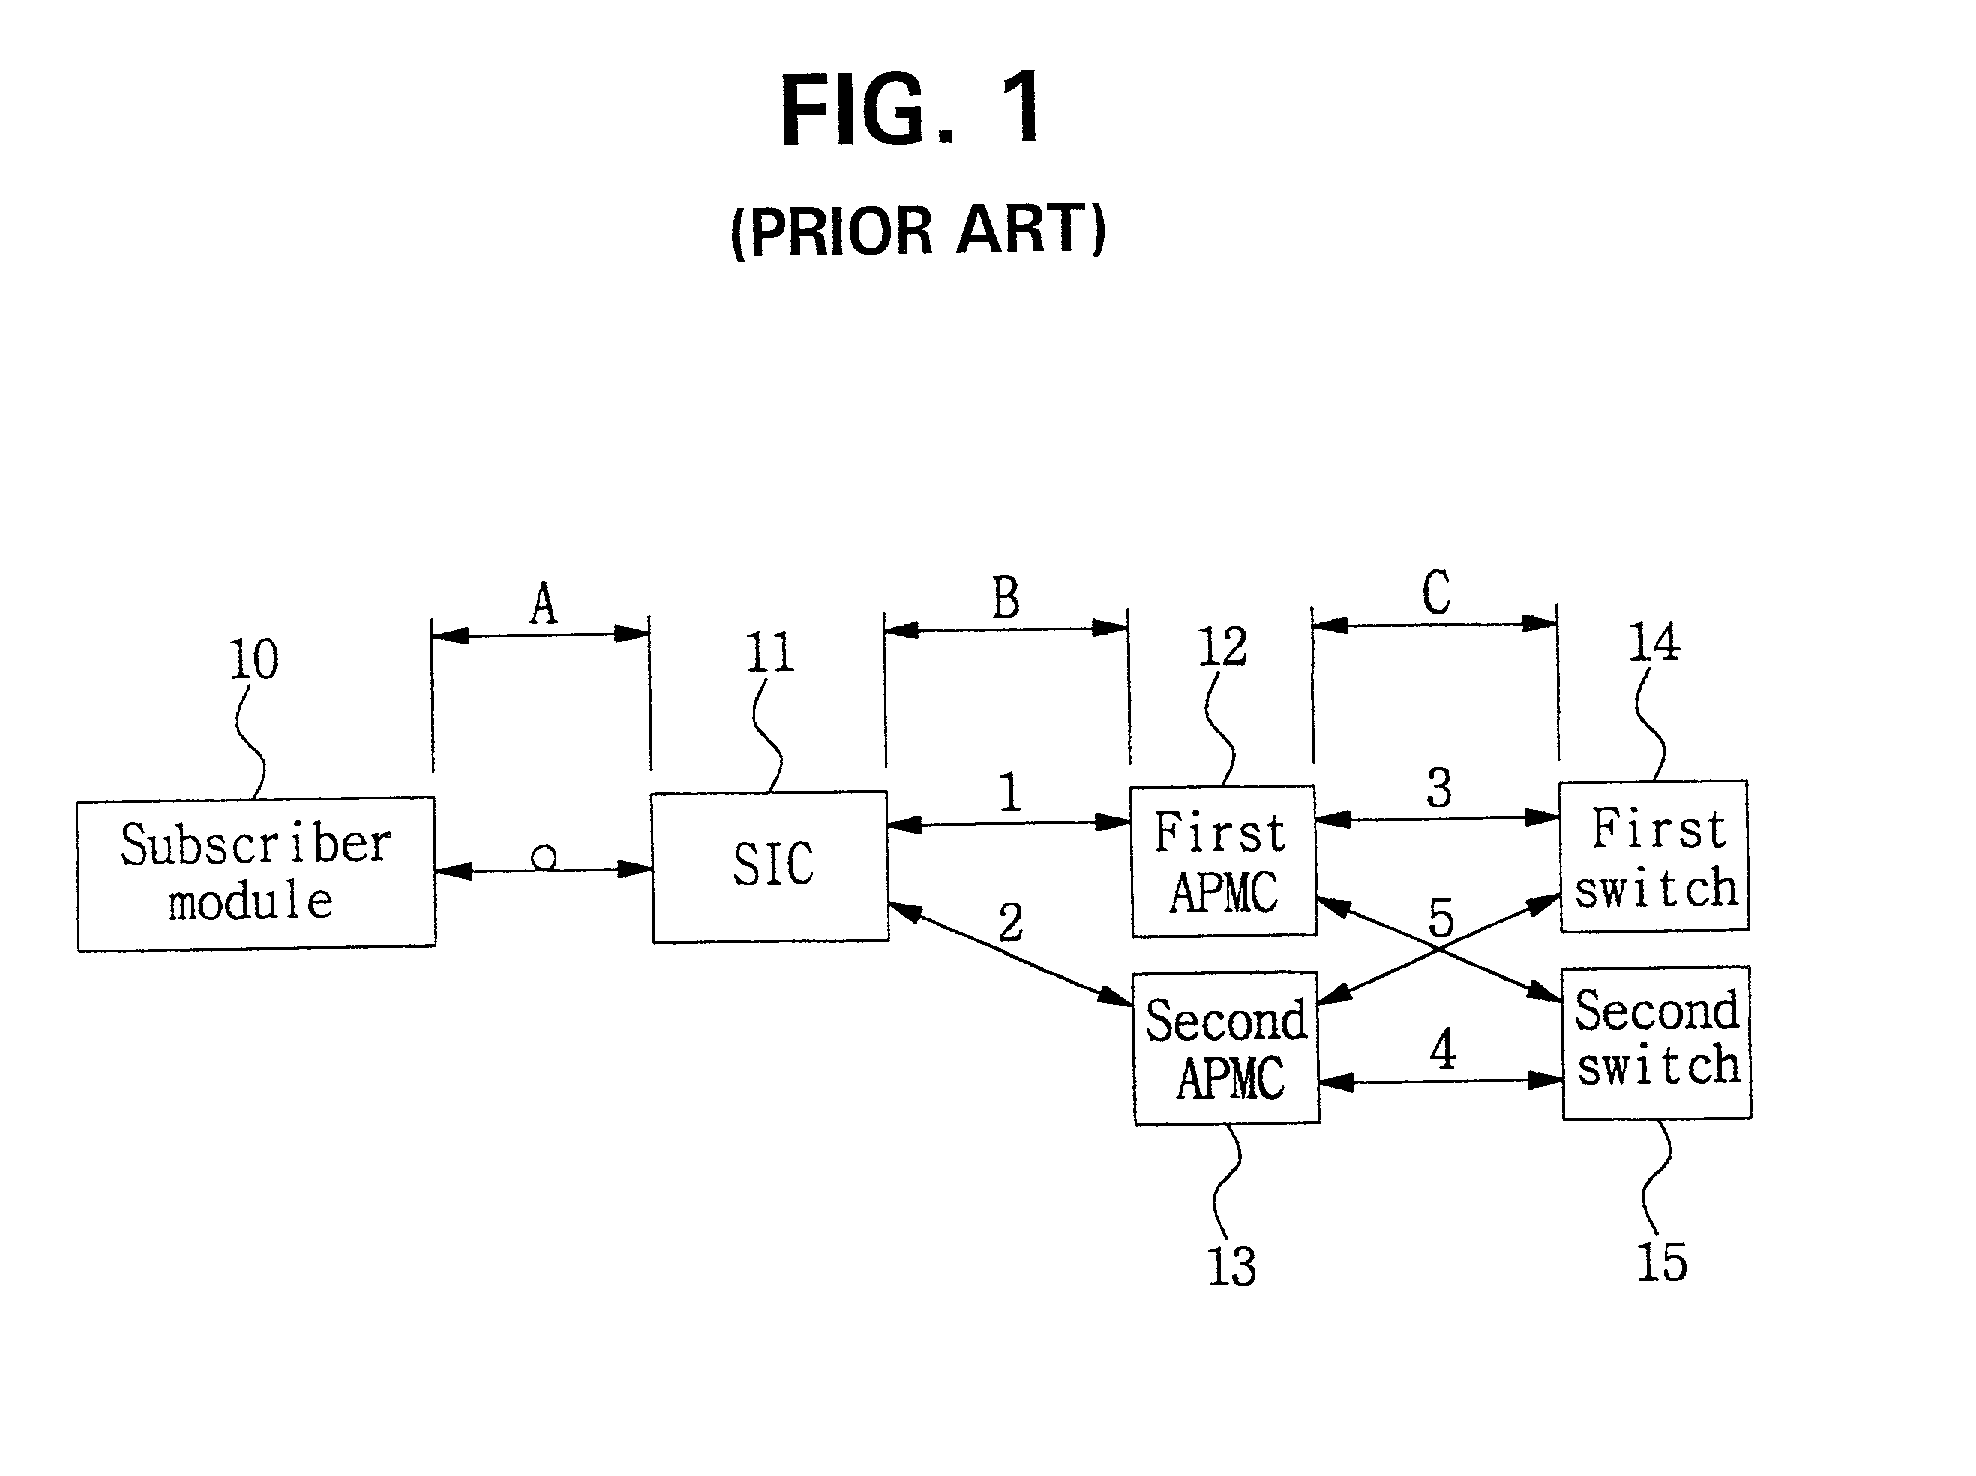 Board duplexing apparatus for asynchronous transfer mode switch and method of controlling the same